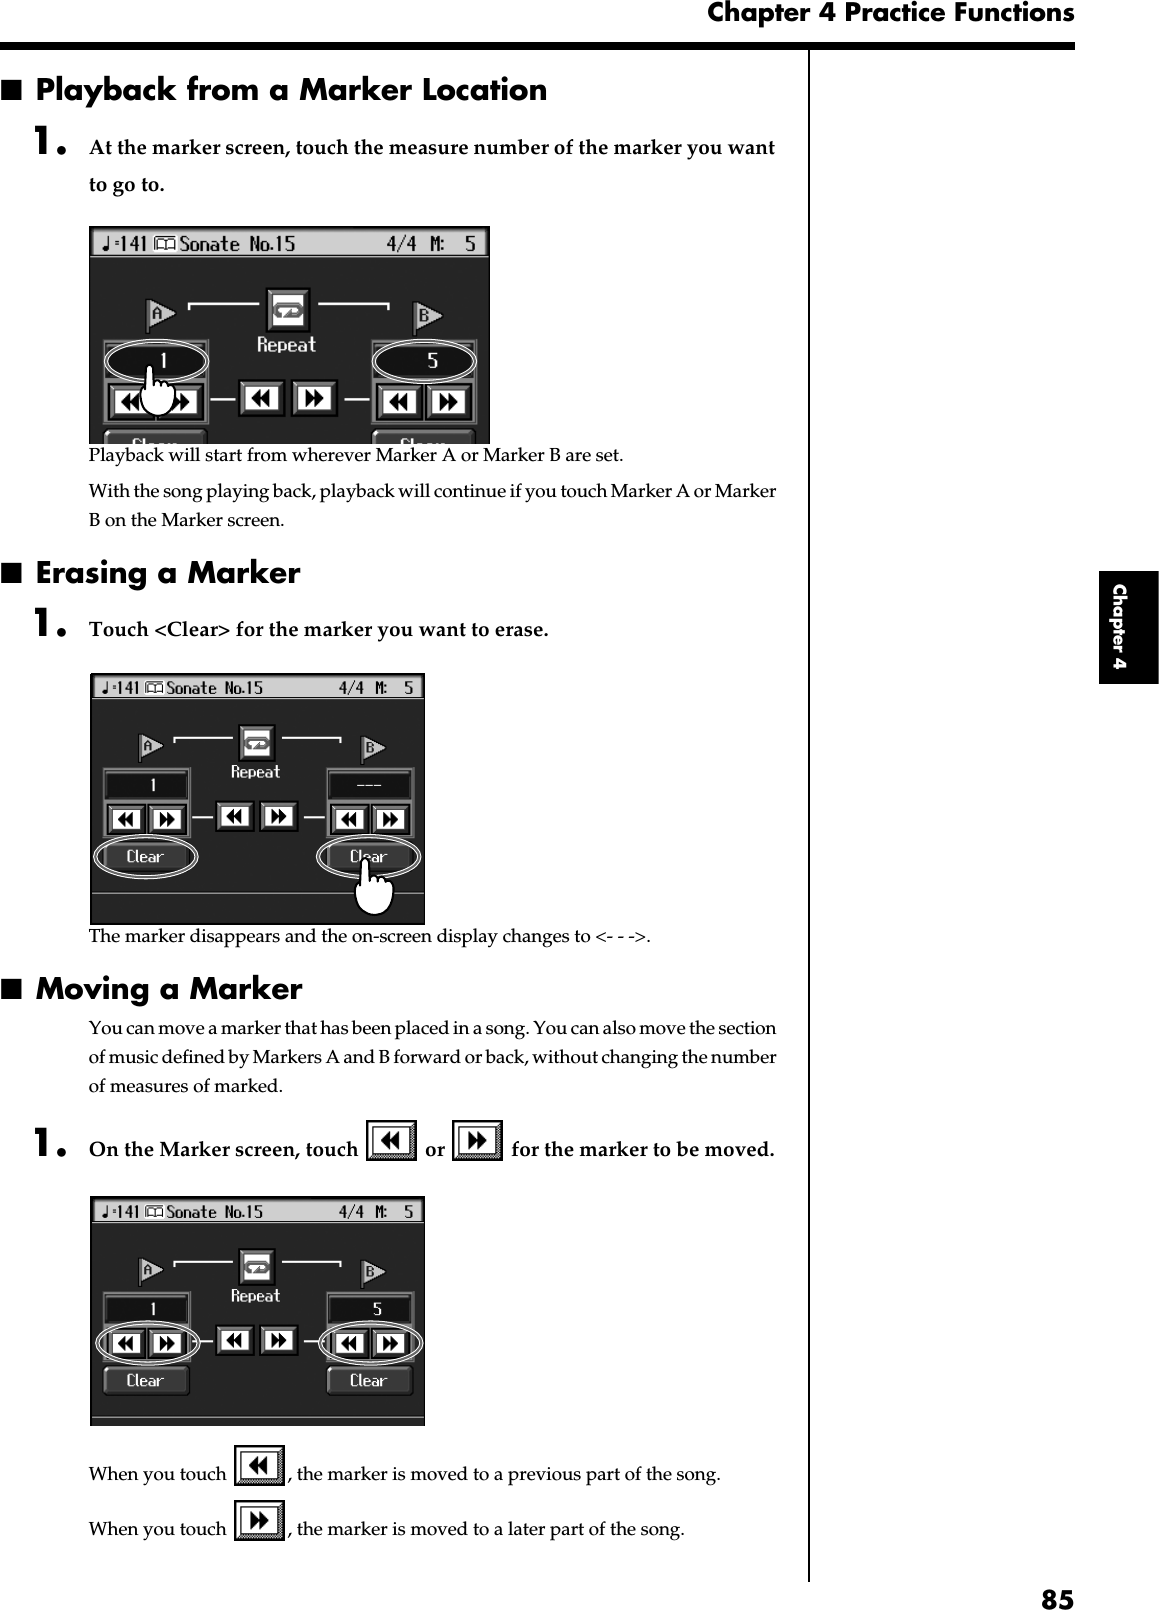 85Chapter 4 Practice FunctionsChapter 4■Playback from a Marker Location1. At the marker screen, touch the measure number of the marker you want to go to. fig.d-mark1-5.eps_60Playback will start from wherever Marker A or Marker B are set.With the song playing back, playback will continue if you touch Marker A or Marker B on the Marker screen.■Erasing a Marker1. Touch &lt;Clear&gt; for the marker you want to erase.fig.d-markclear.eps_60The marker disappears and the on-screen display changes to &lt;- - -&gt;.■Moving a MarkerYou can move a marker that has been placed in a song. You can also move the section of music defined by Markers A and B forward or back, without changing the number of measures of marked.1. On the Marker screen, touch   or   for the marker to be moved. fig.d-mark1-5.eps_60When you touch  , the marker is moved to a previous part of the song. When you touch  , the marker is moved to a later part of the song. 